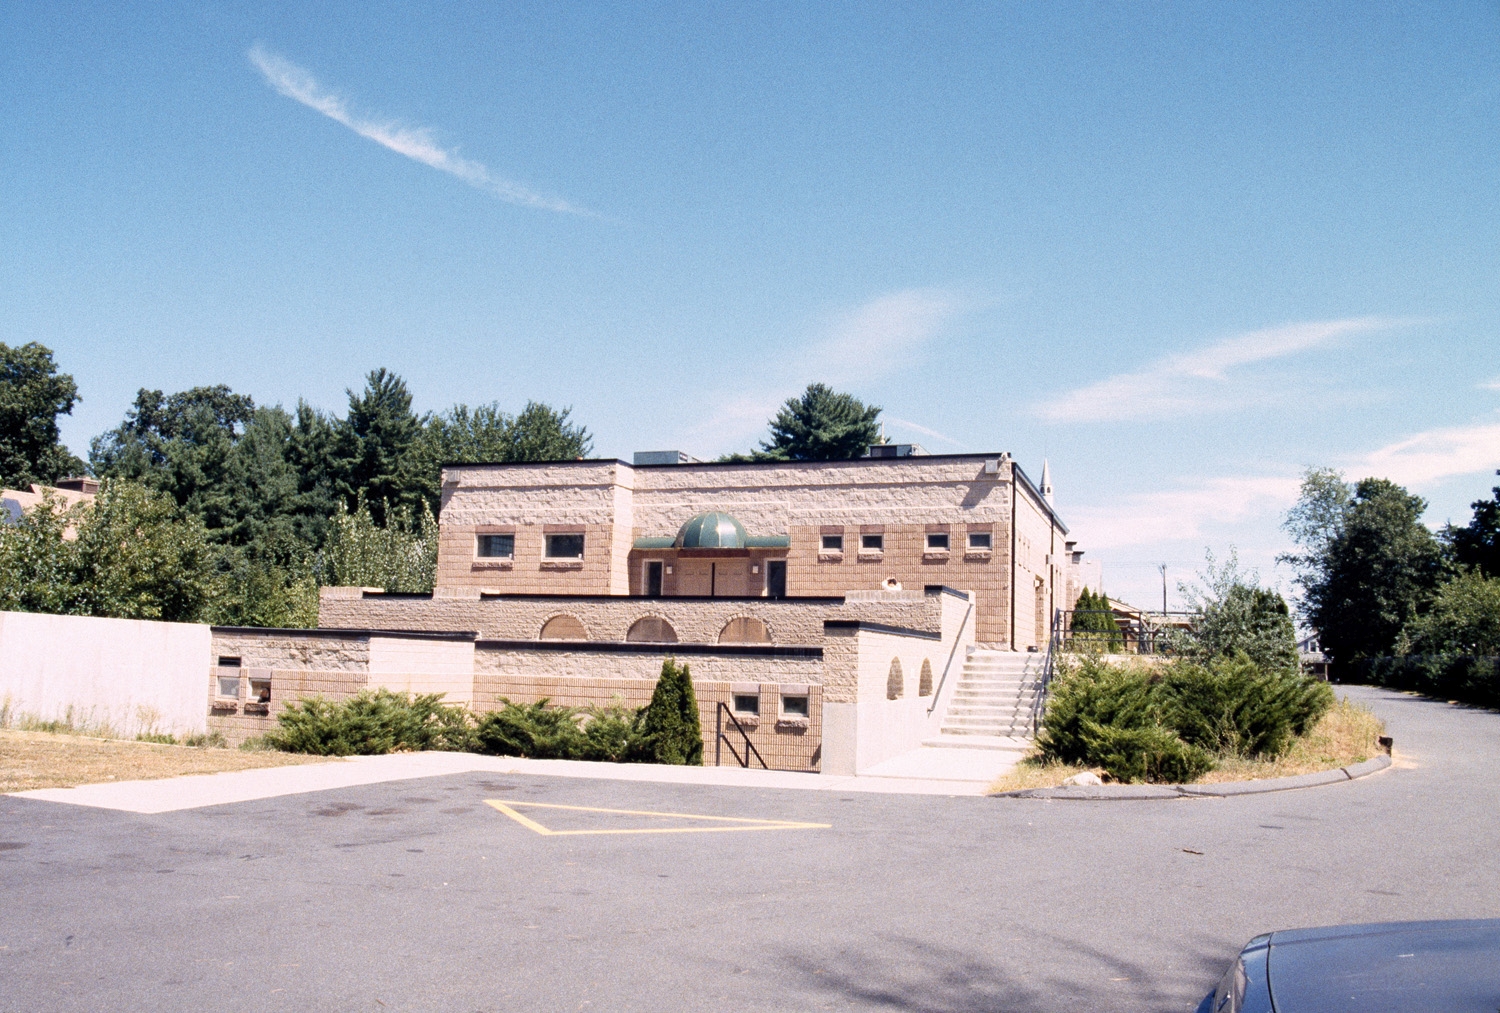 Islamic Society of Western Massachusetts - Rear of original mosque building, prior to expansion